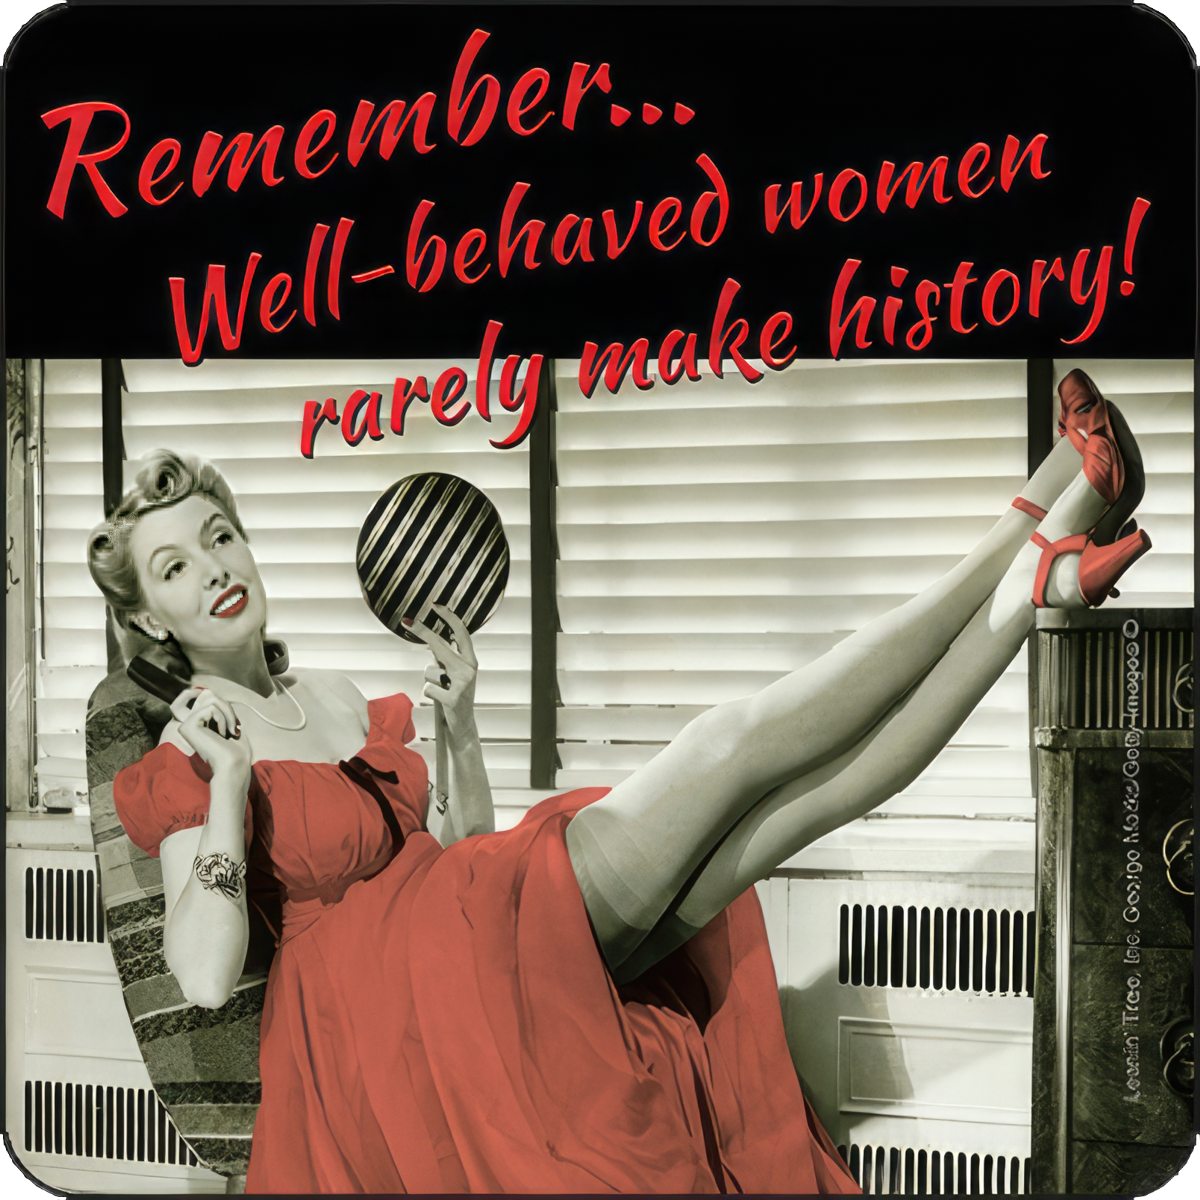 Well-behaved women rarely make history!